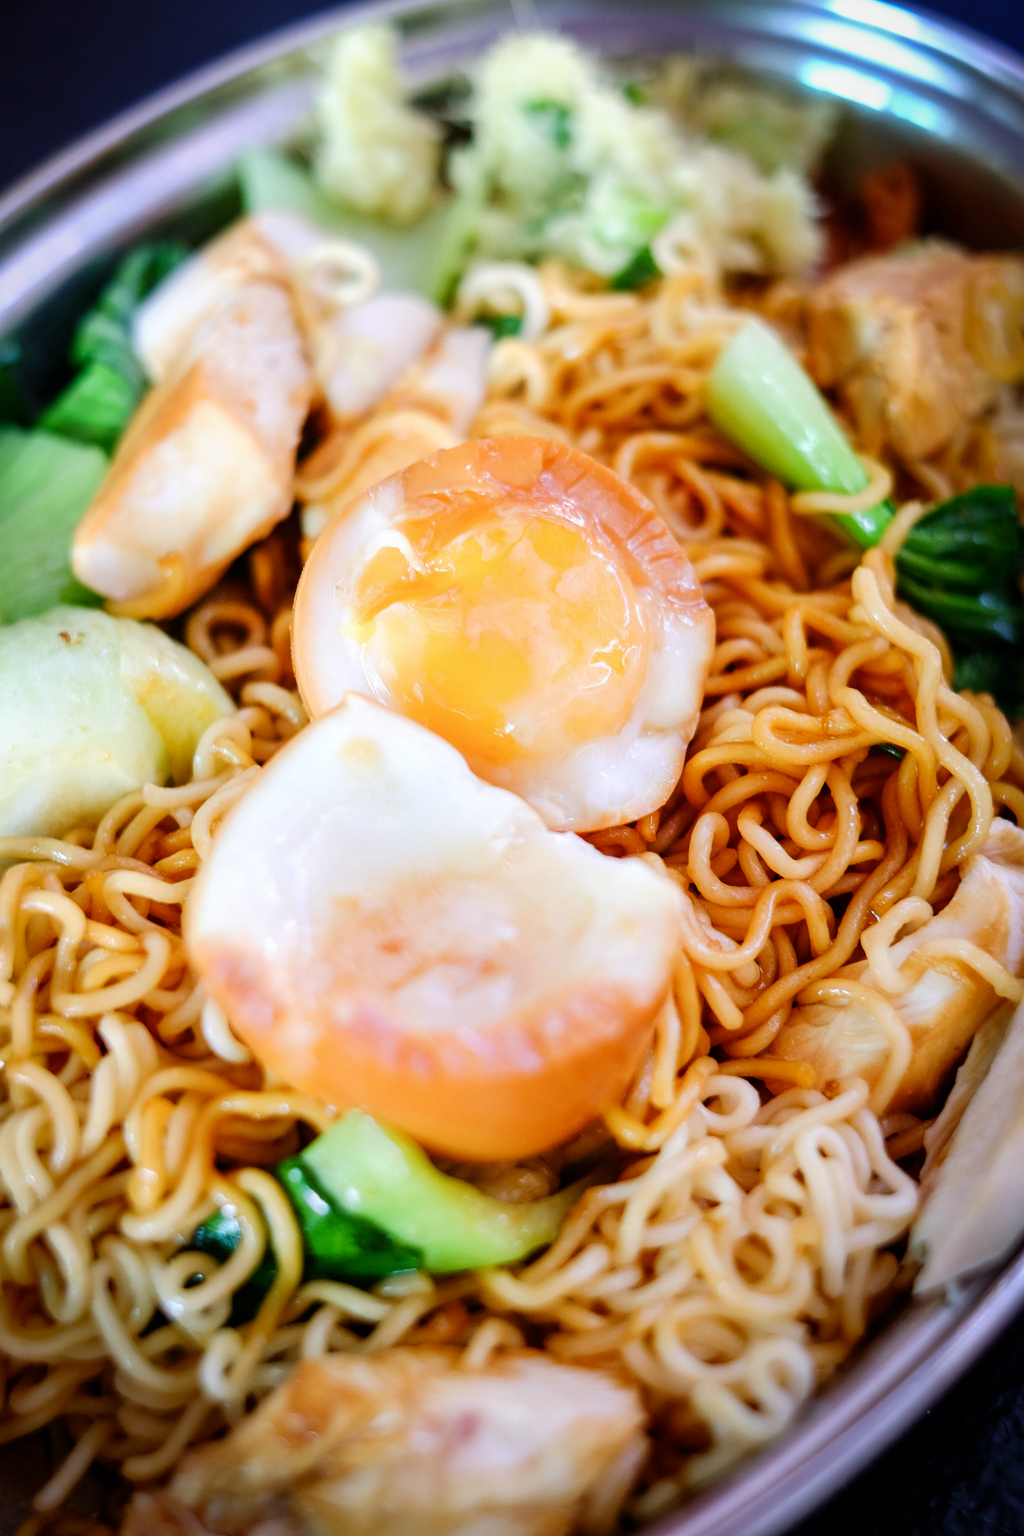 Uncle Chicken Rice: instant noodles cooked till al dente, topped with soy sauce chicken, a lava egg, luncheon meat, fresh greens and their signature ginger and scallion dip